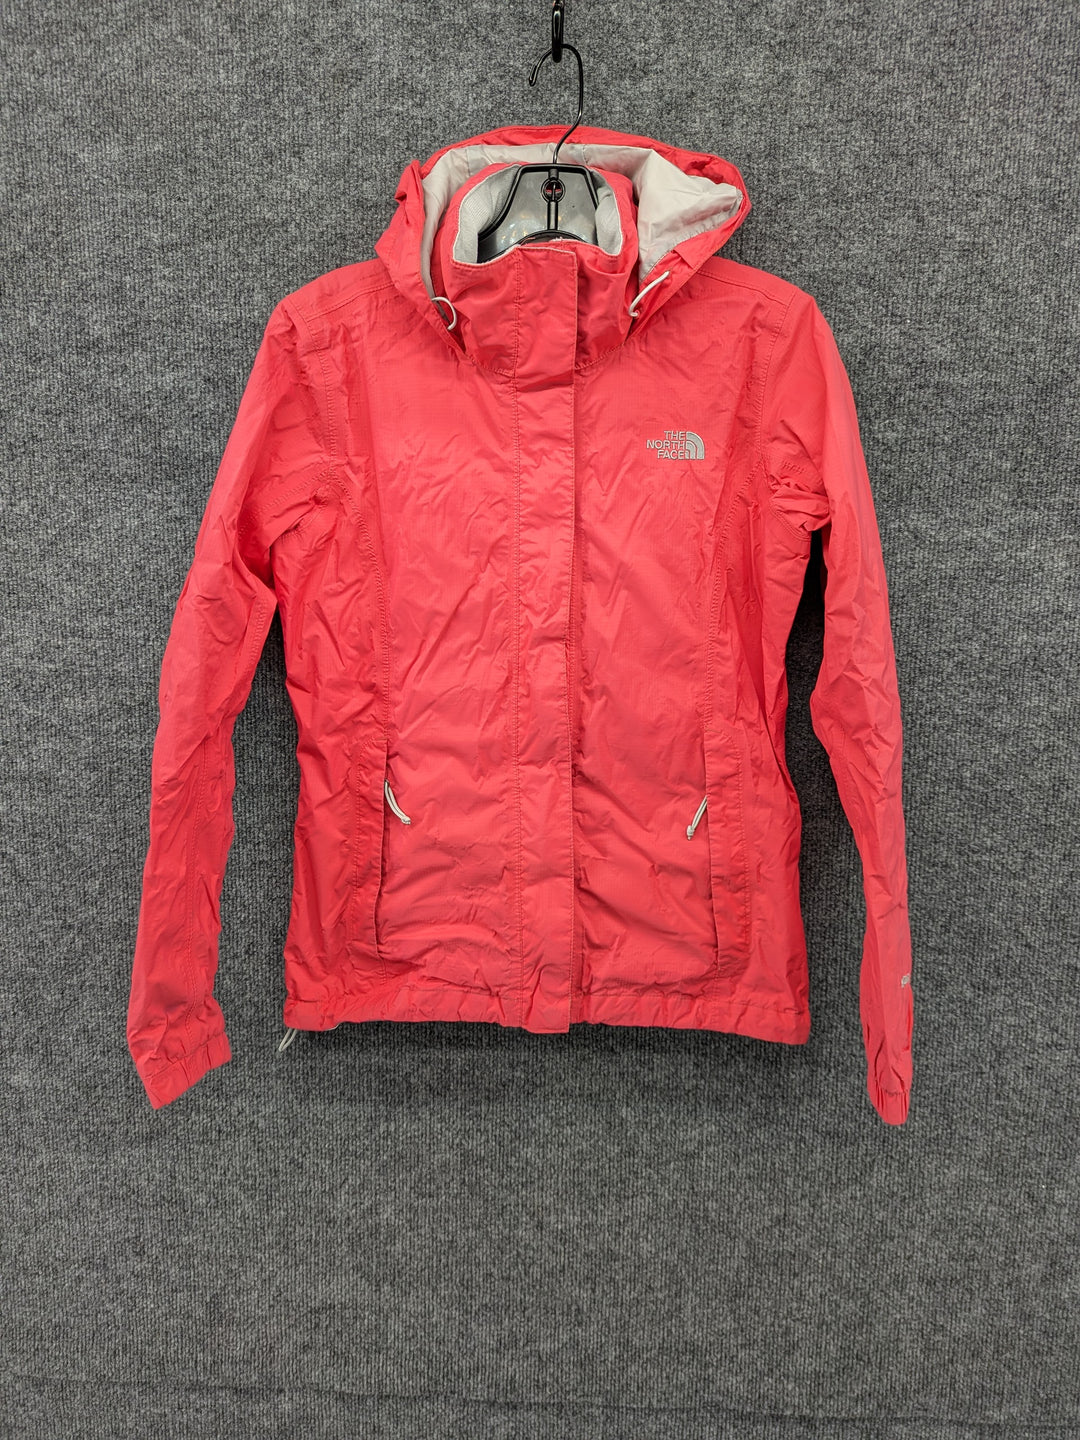 The North Face Size W Small Women's Rain Jacket